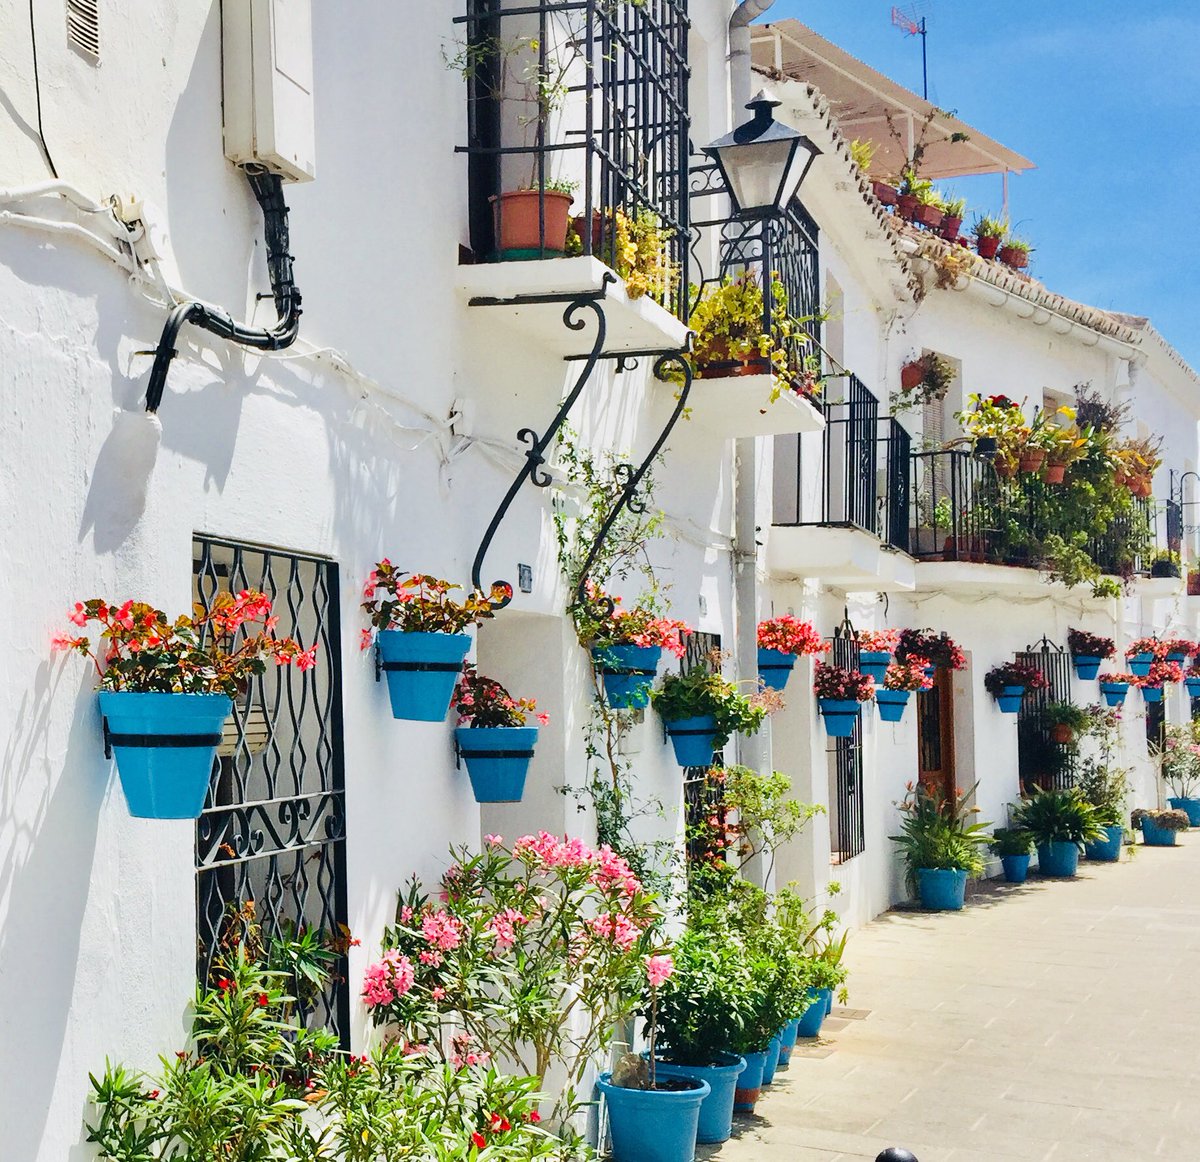 One of the most inviting towns in #Spain is #Mijas. #Andalucia #whitevillage #insightmoments #blueskies